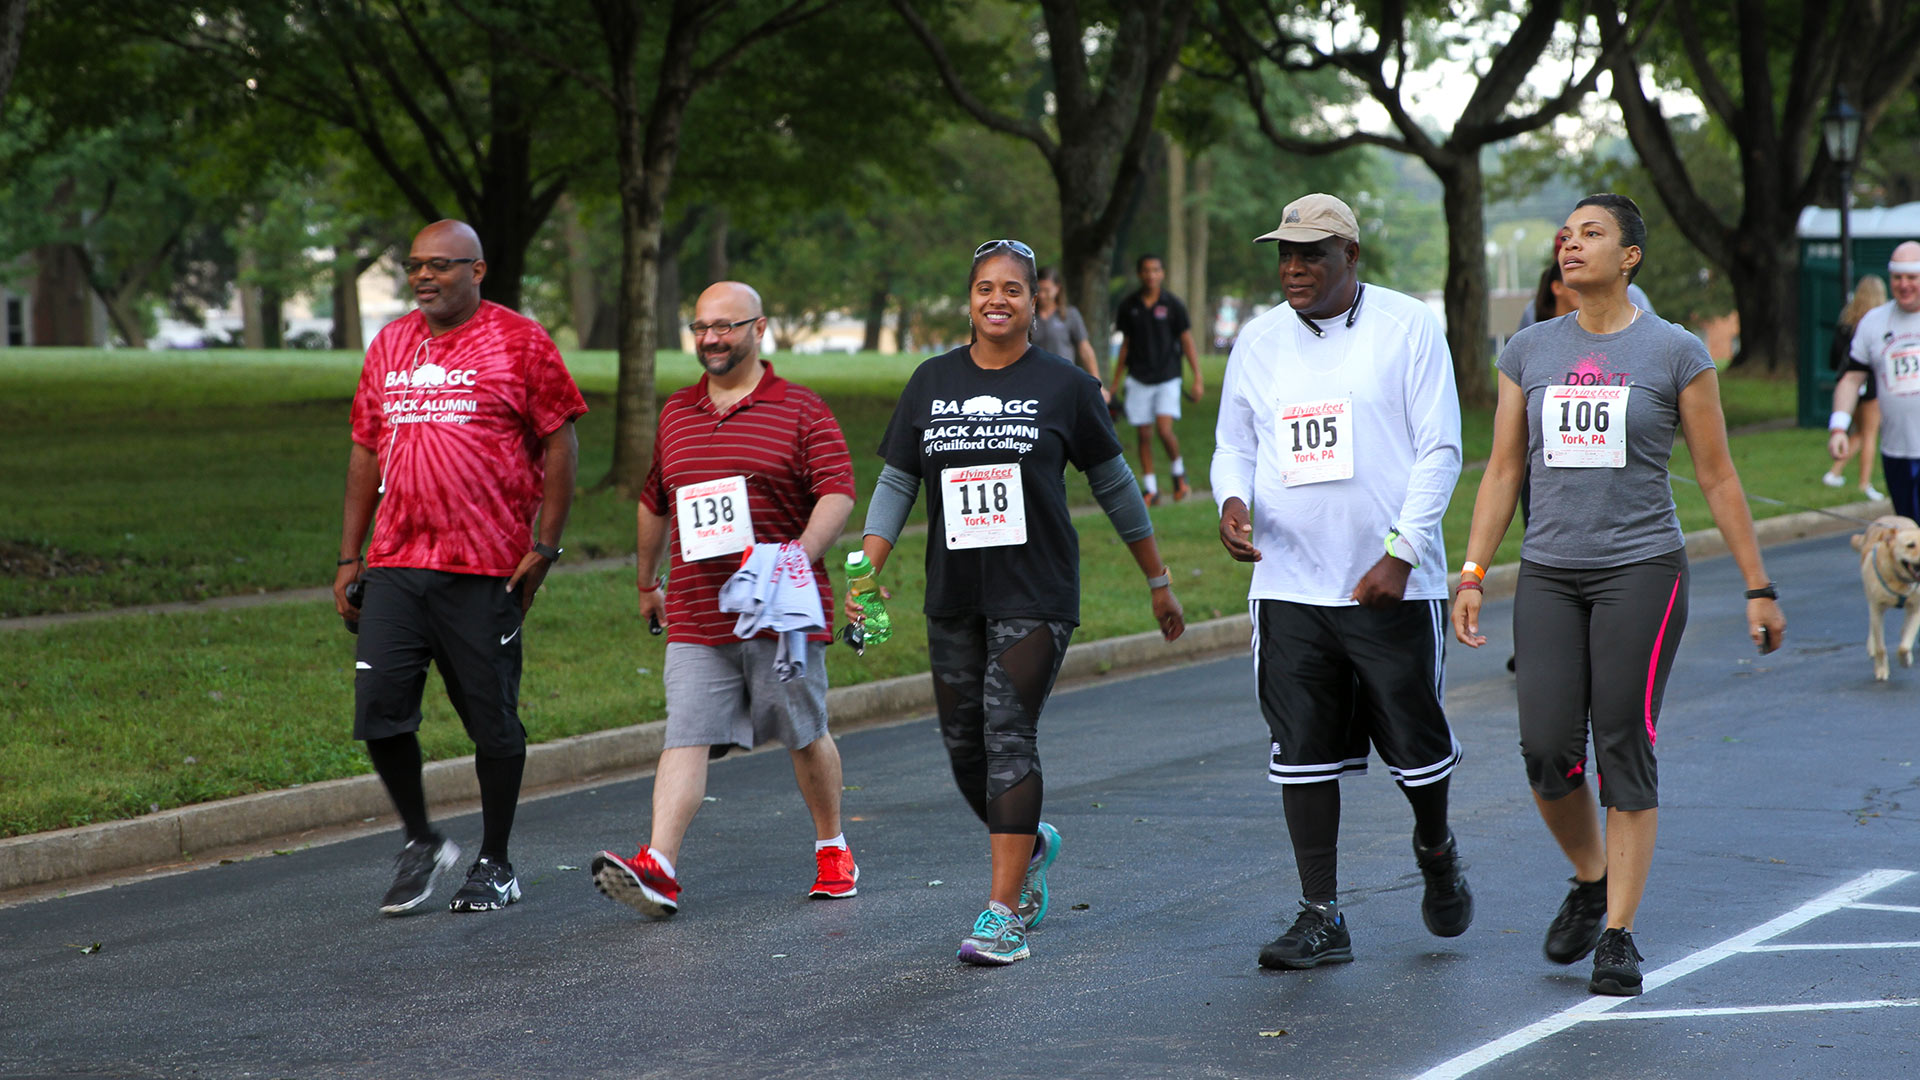 Participants take it easy by walking the Annual Quaker 5K at Homecoming.